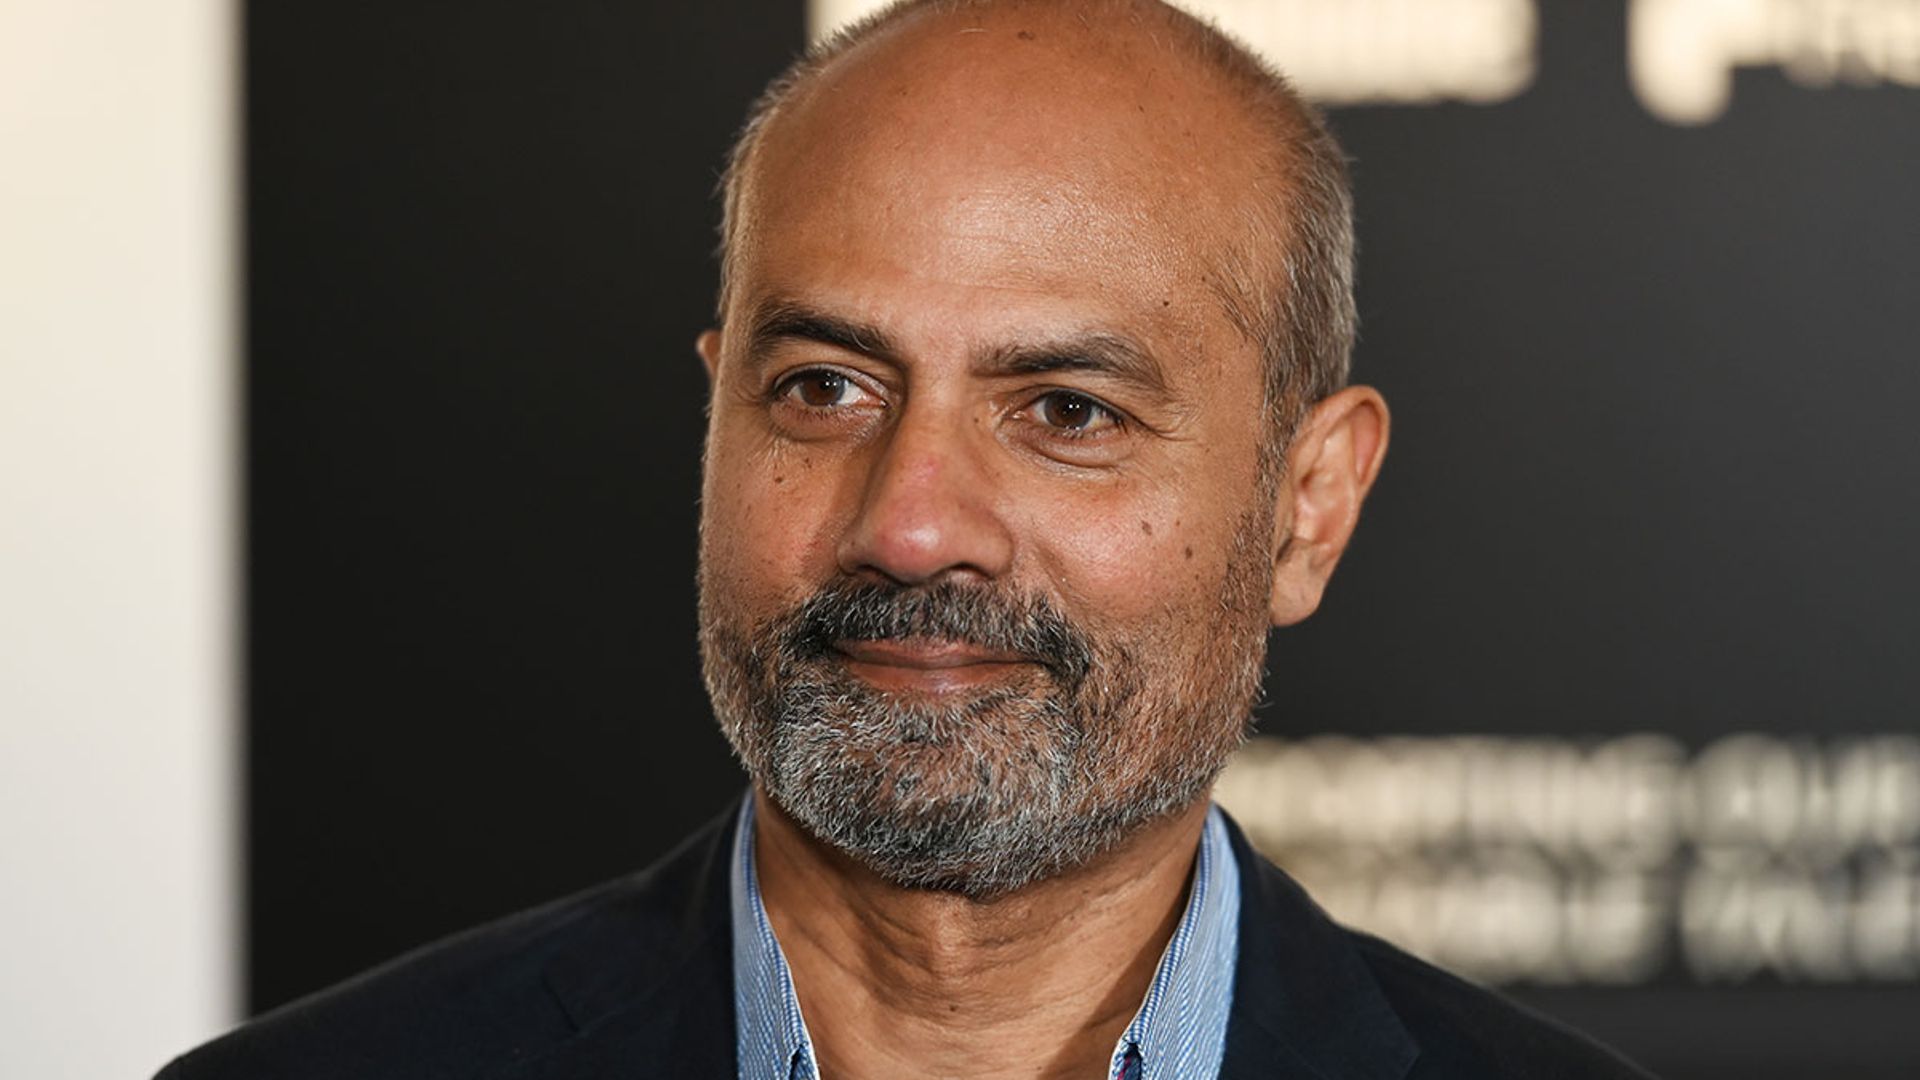 Bbc News Anchor George Alagiah Shares Heartbreaking Cancer Update Hello 